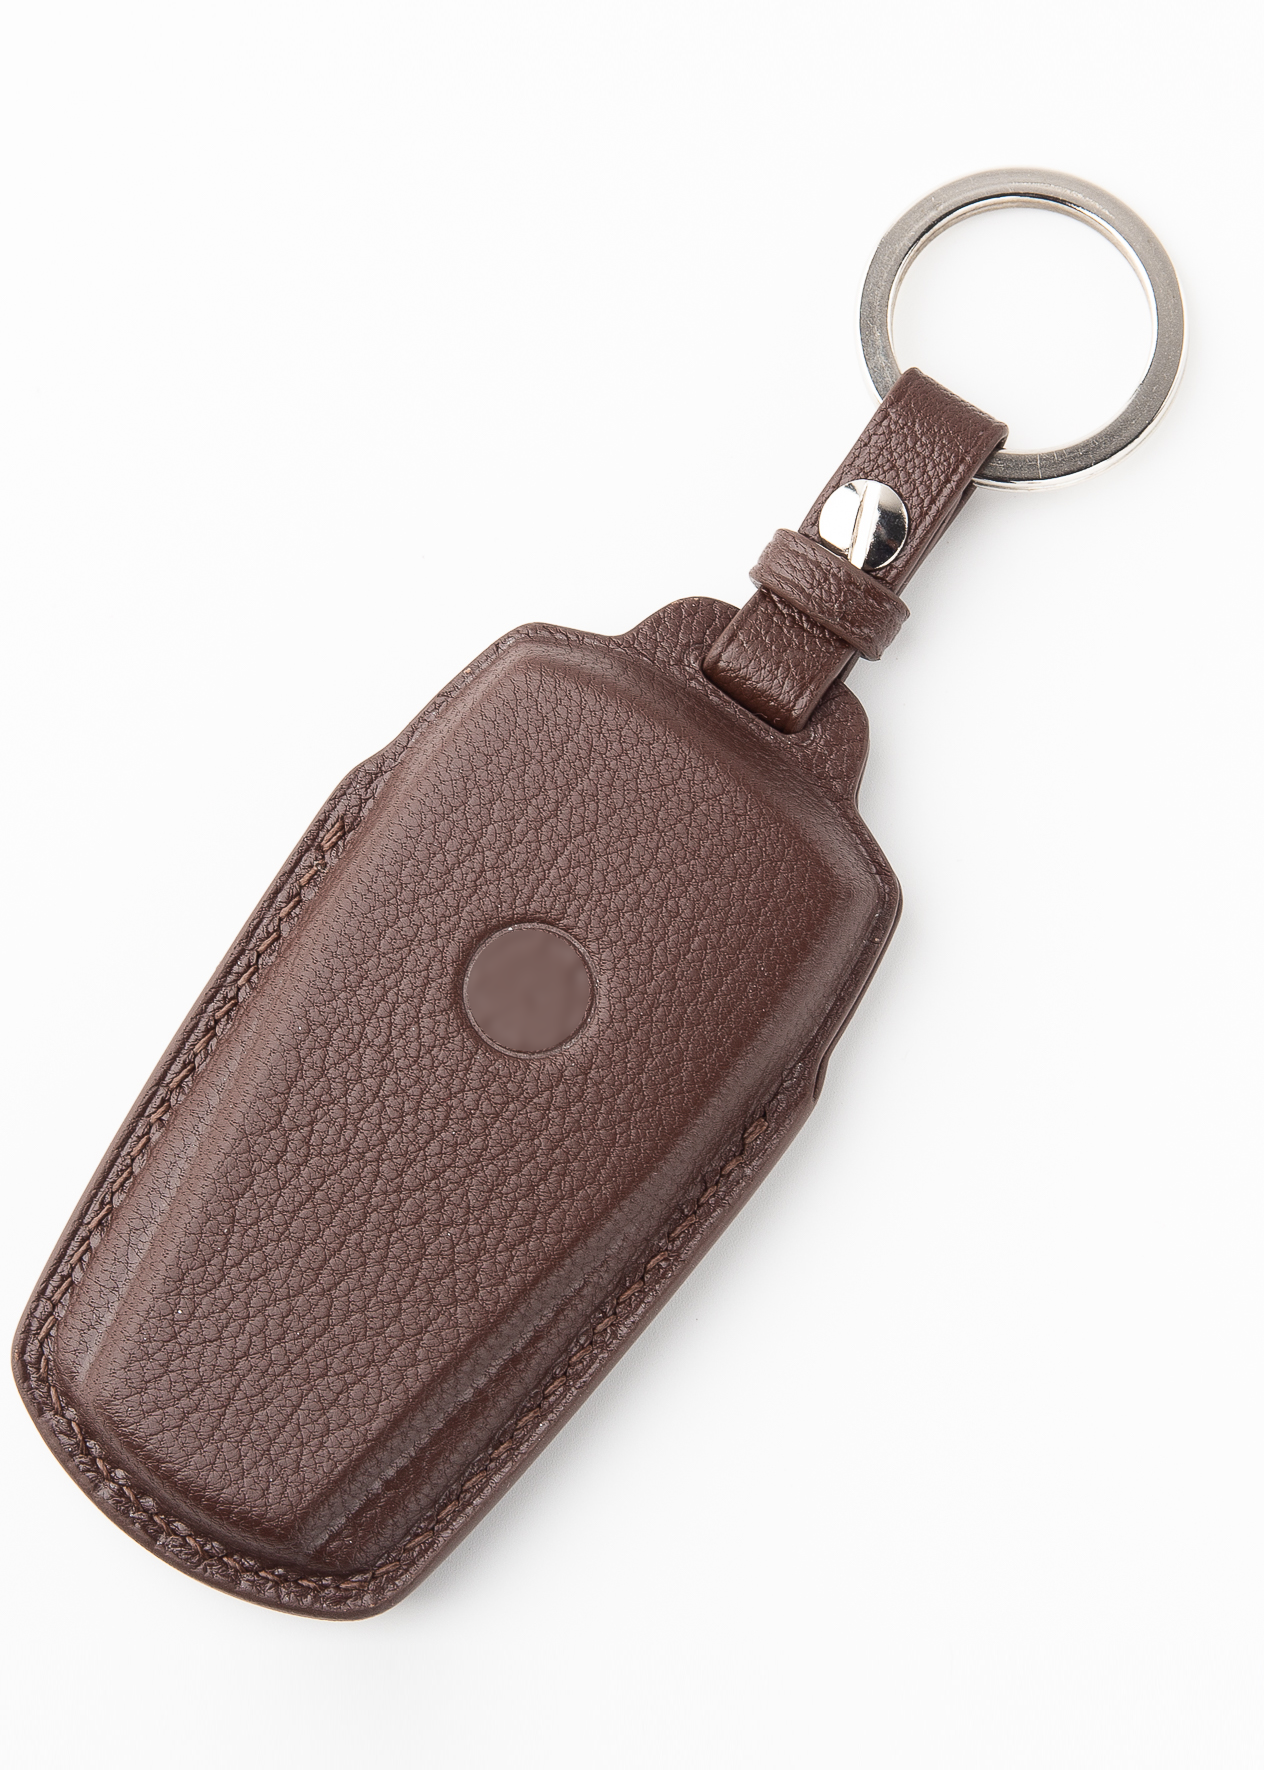 Timotheus for Volkswagen key fob cover case, Compatible with Volkswagen key case, Handmade Genuine Leather for Volkswagen keychains | VG44